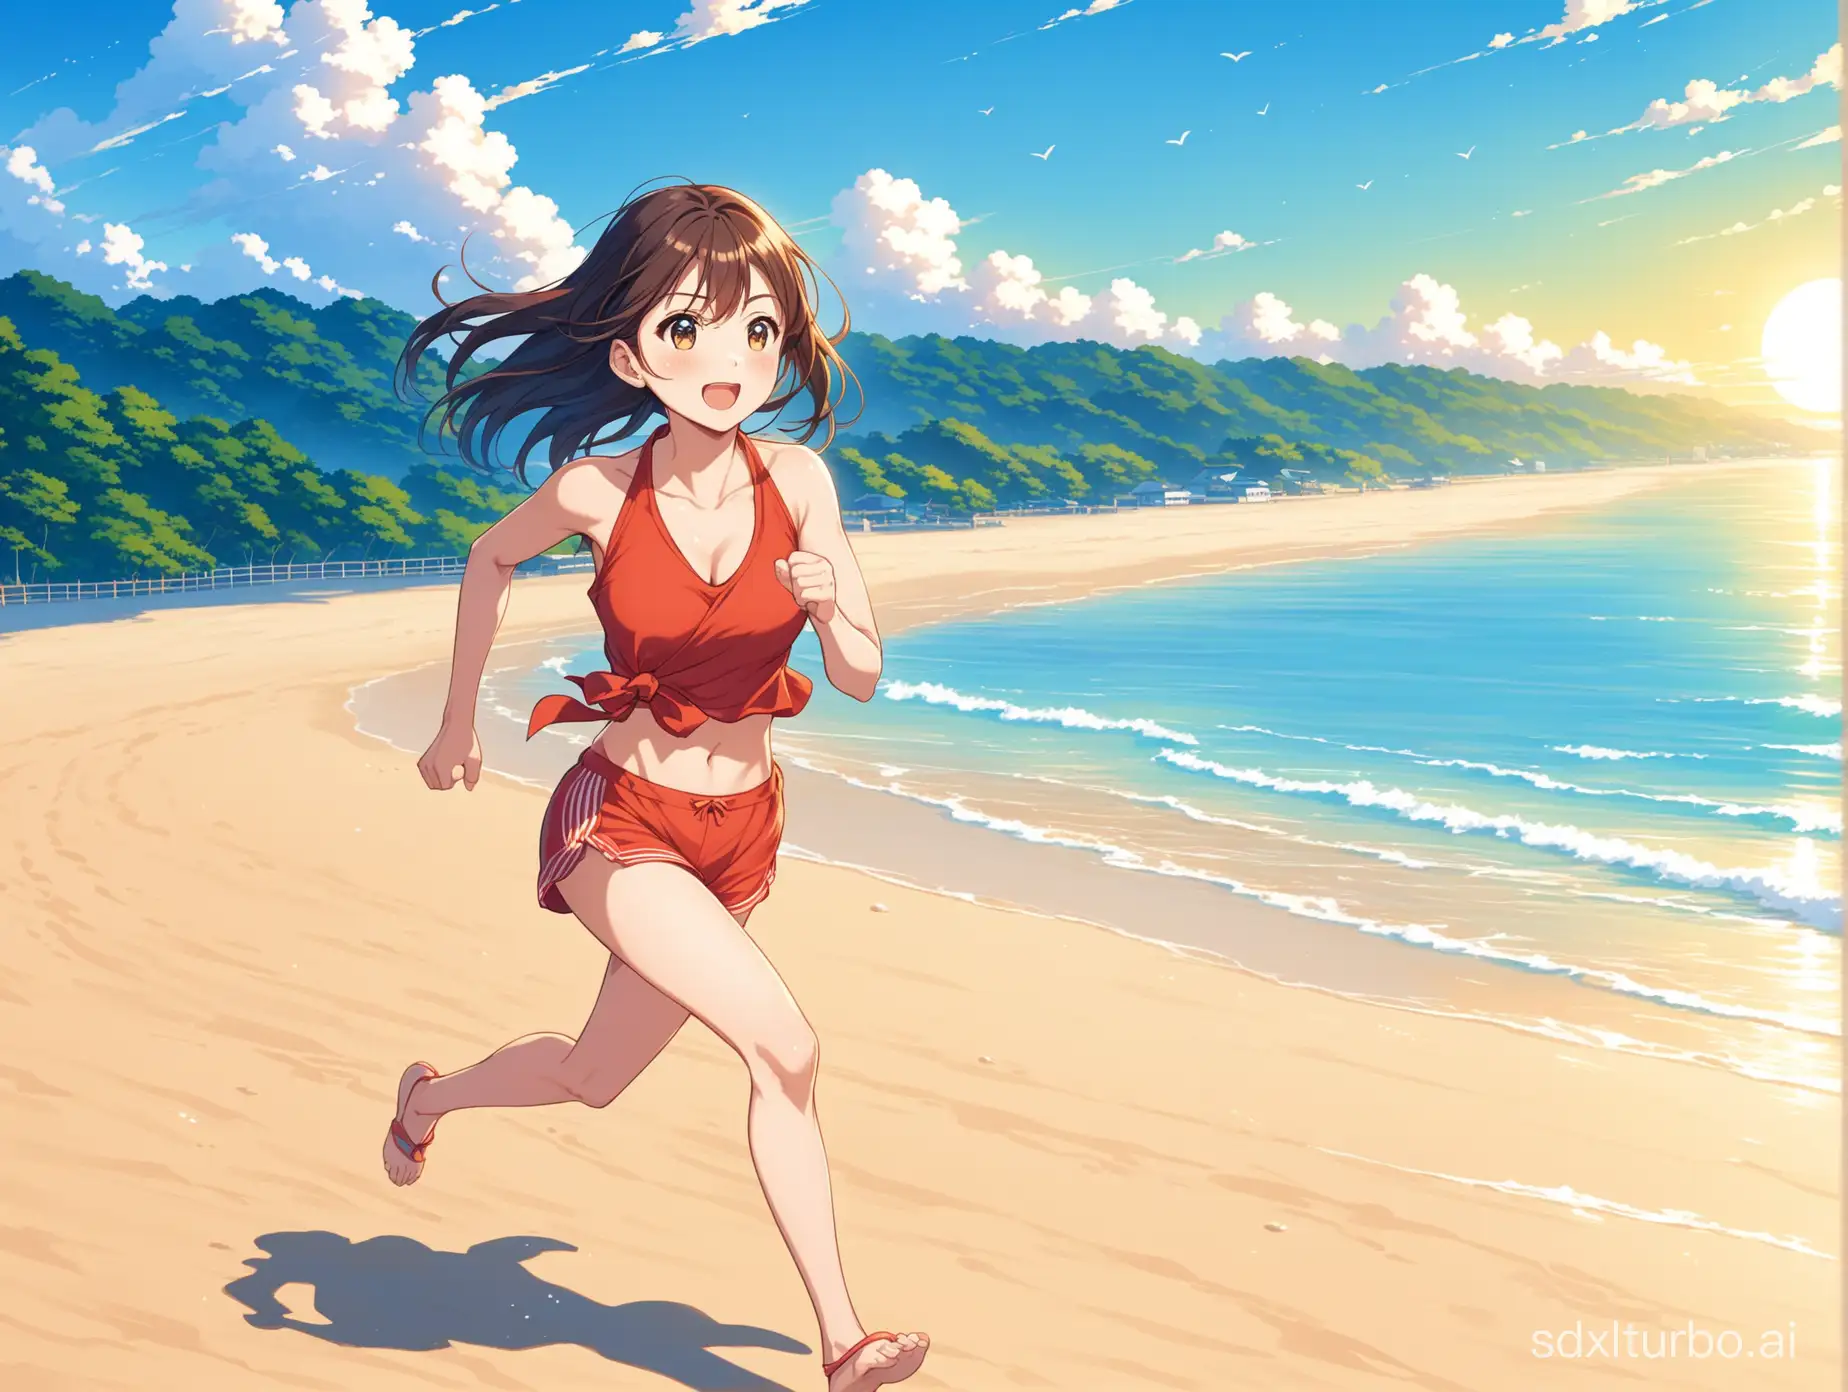 Energetic-Anime-Girl-Running-at-the-Beach